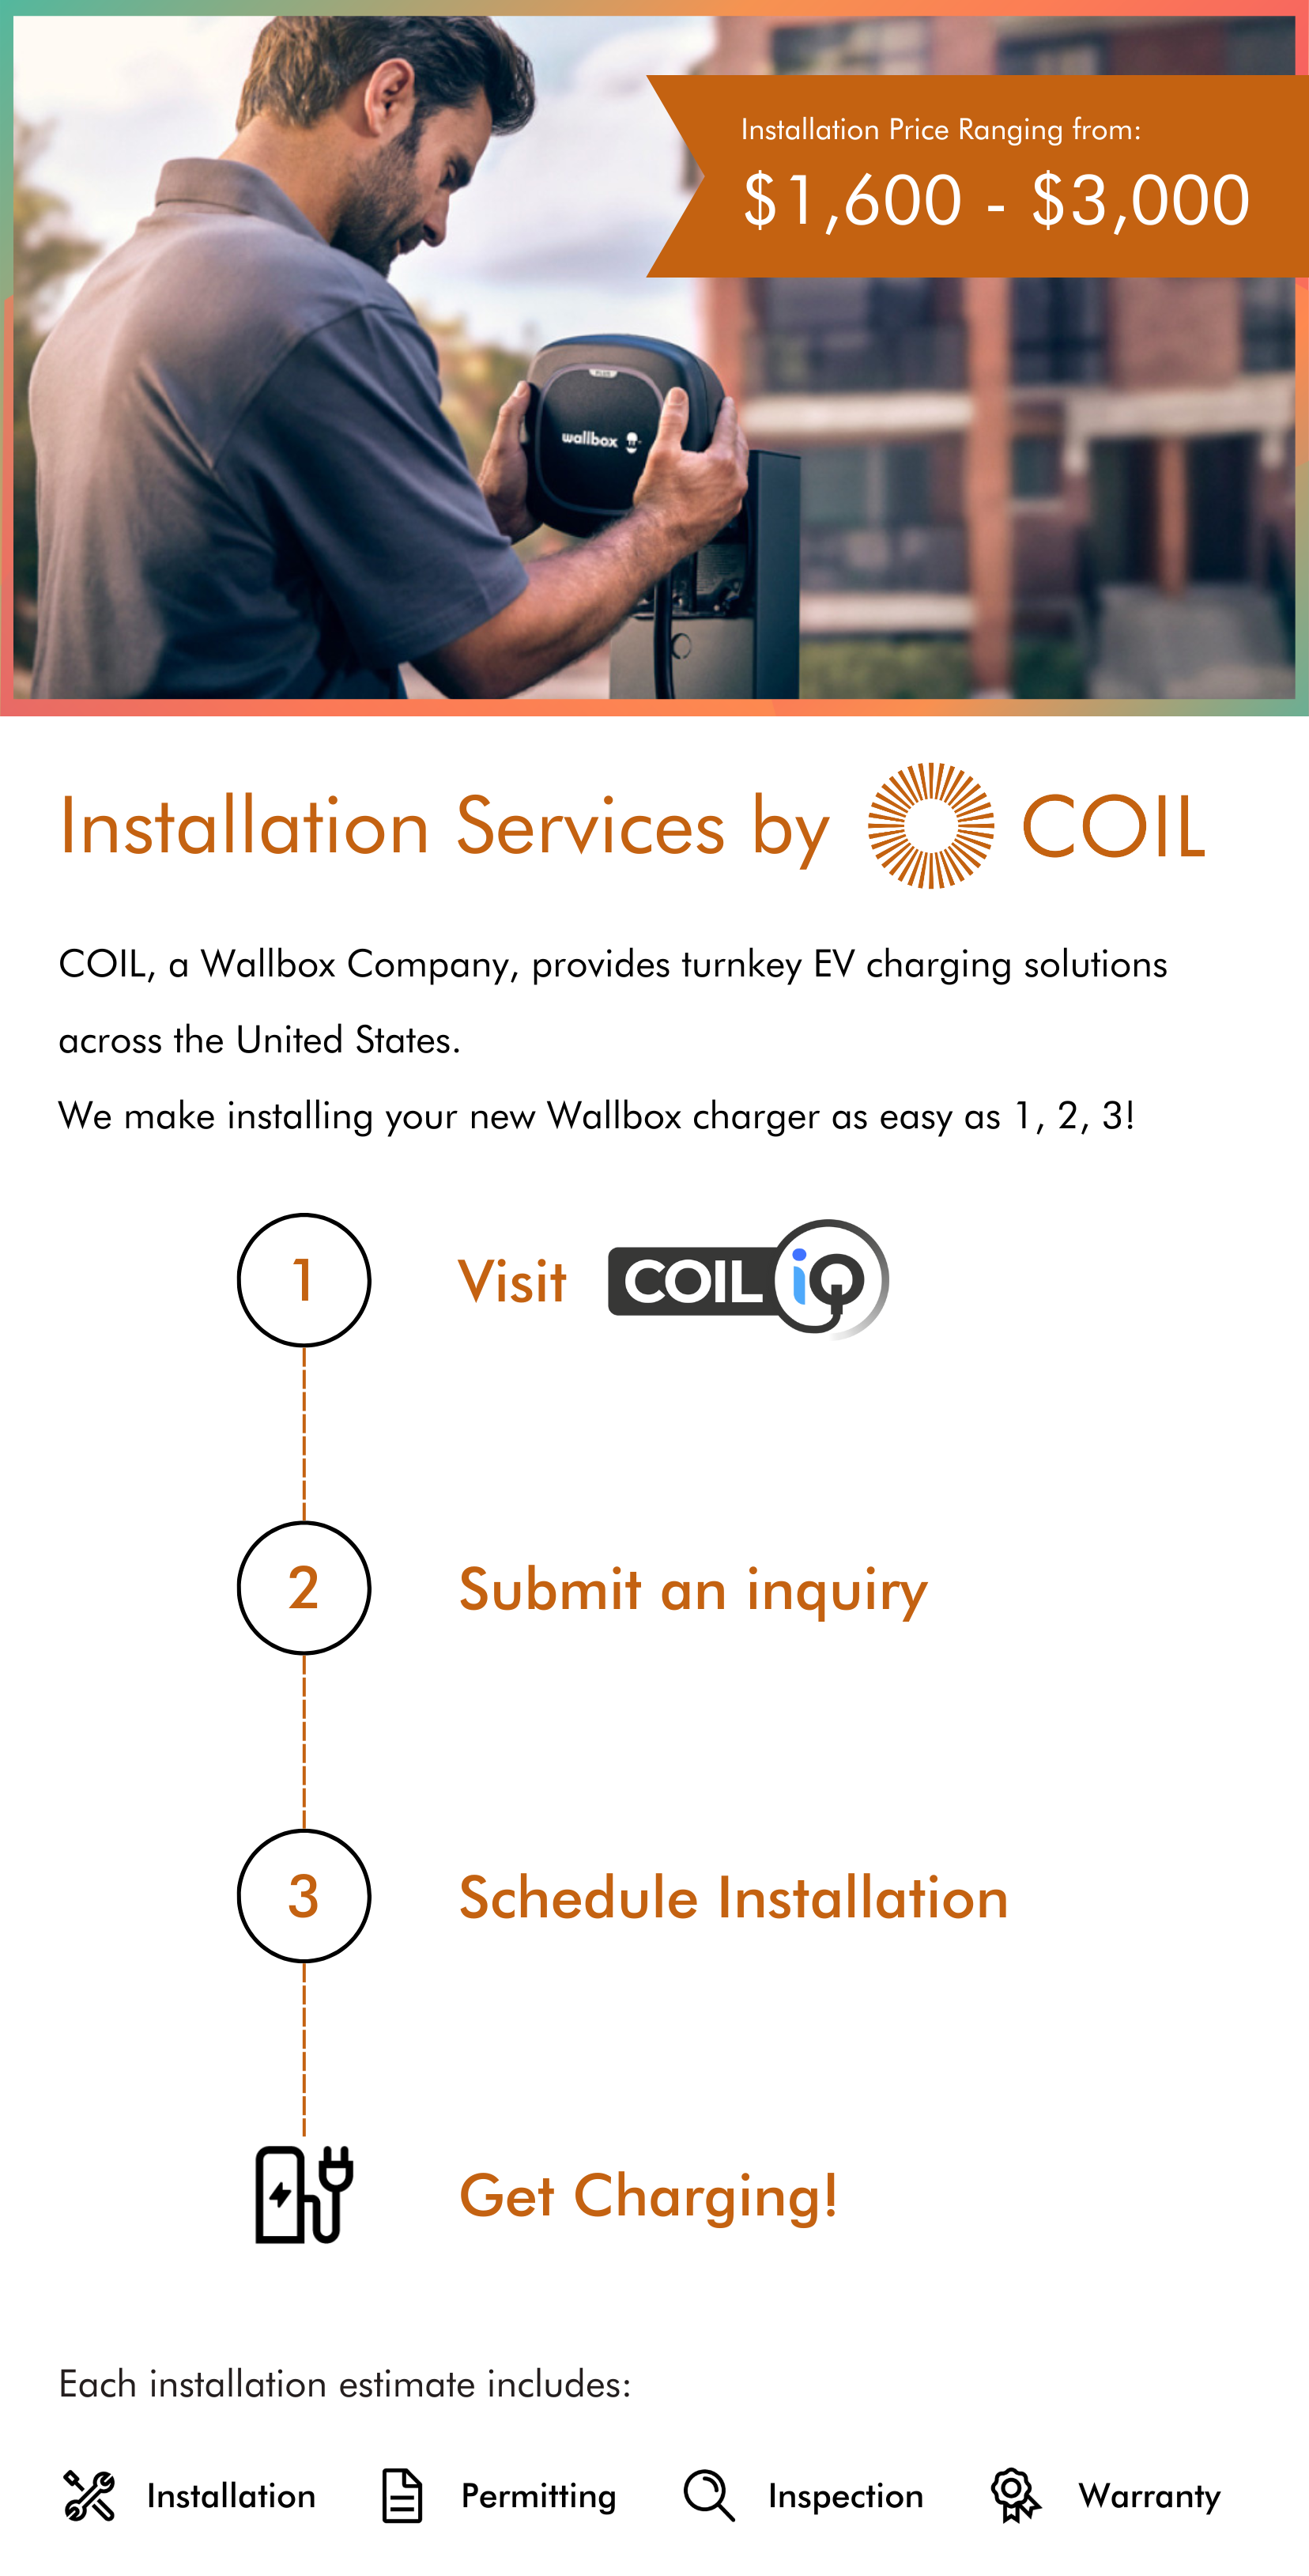 COIL_Installation_Services_-_Mobile1